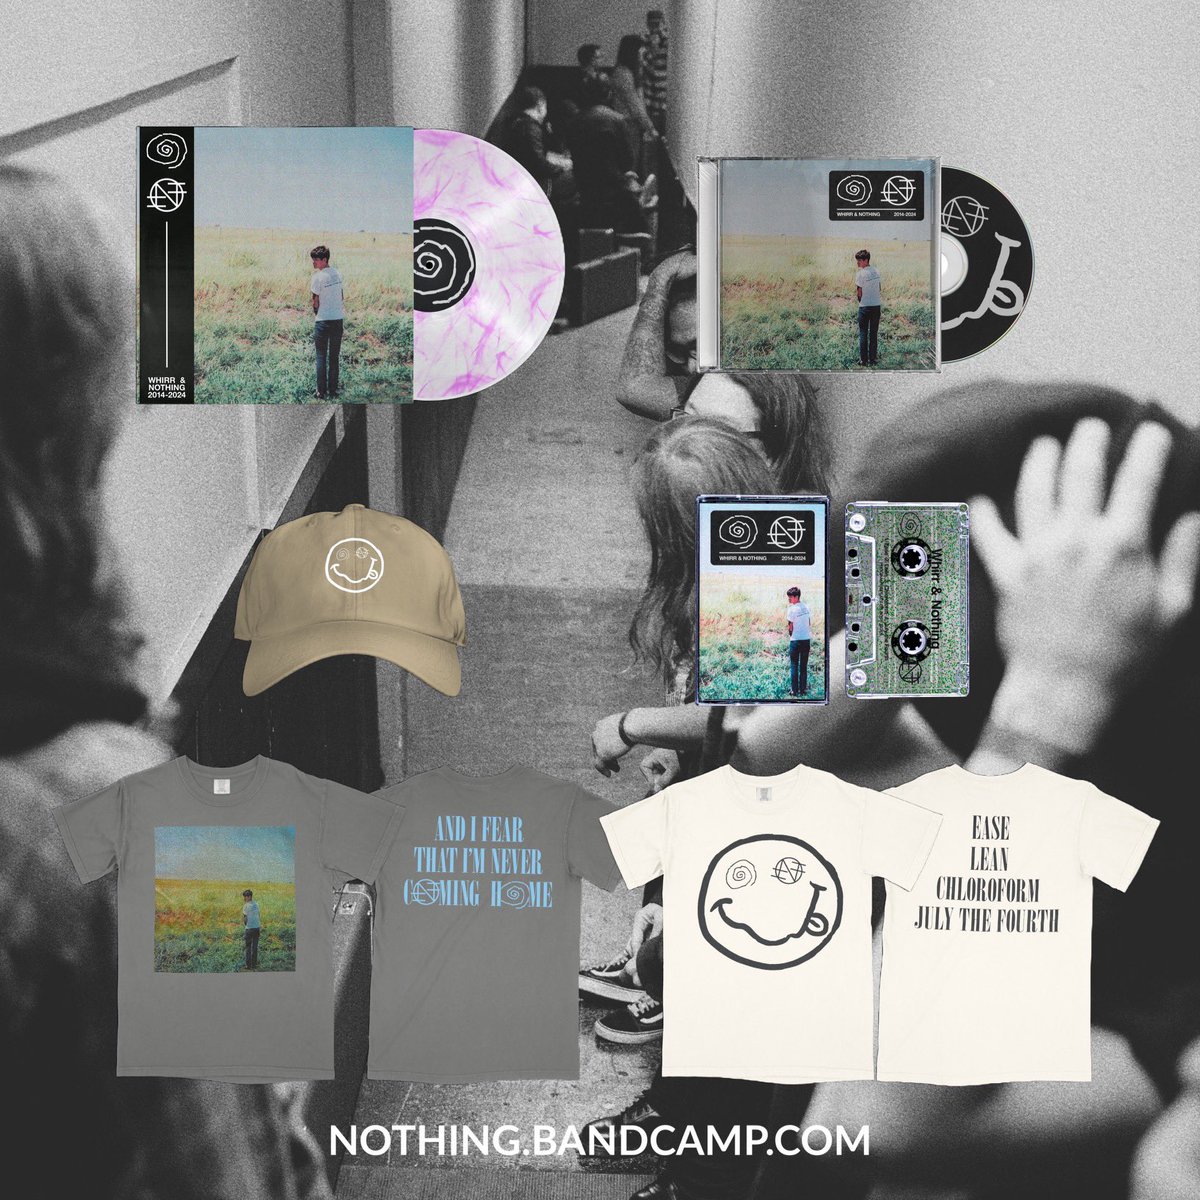 available now - nothing.bandcamp.com